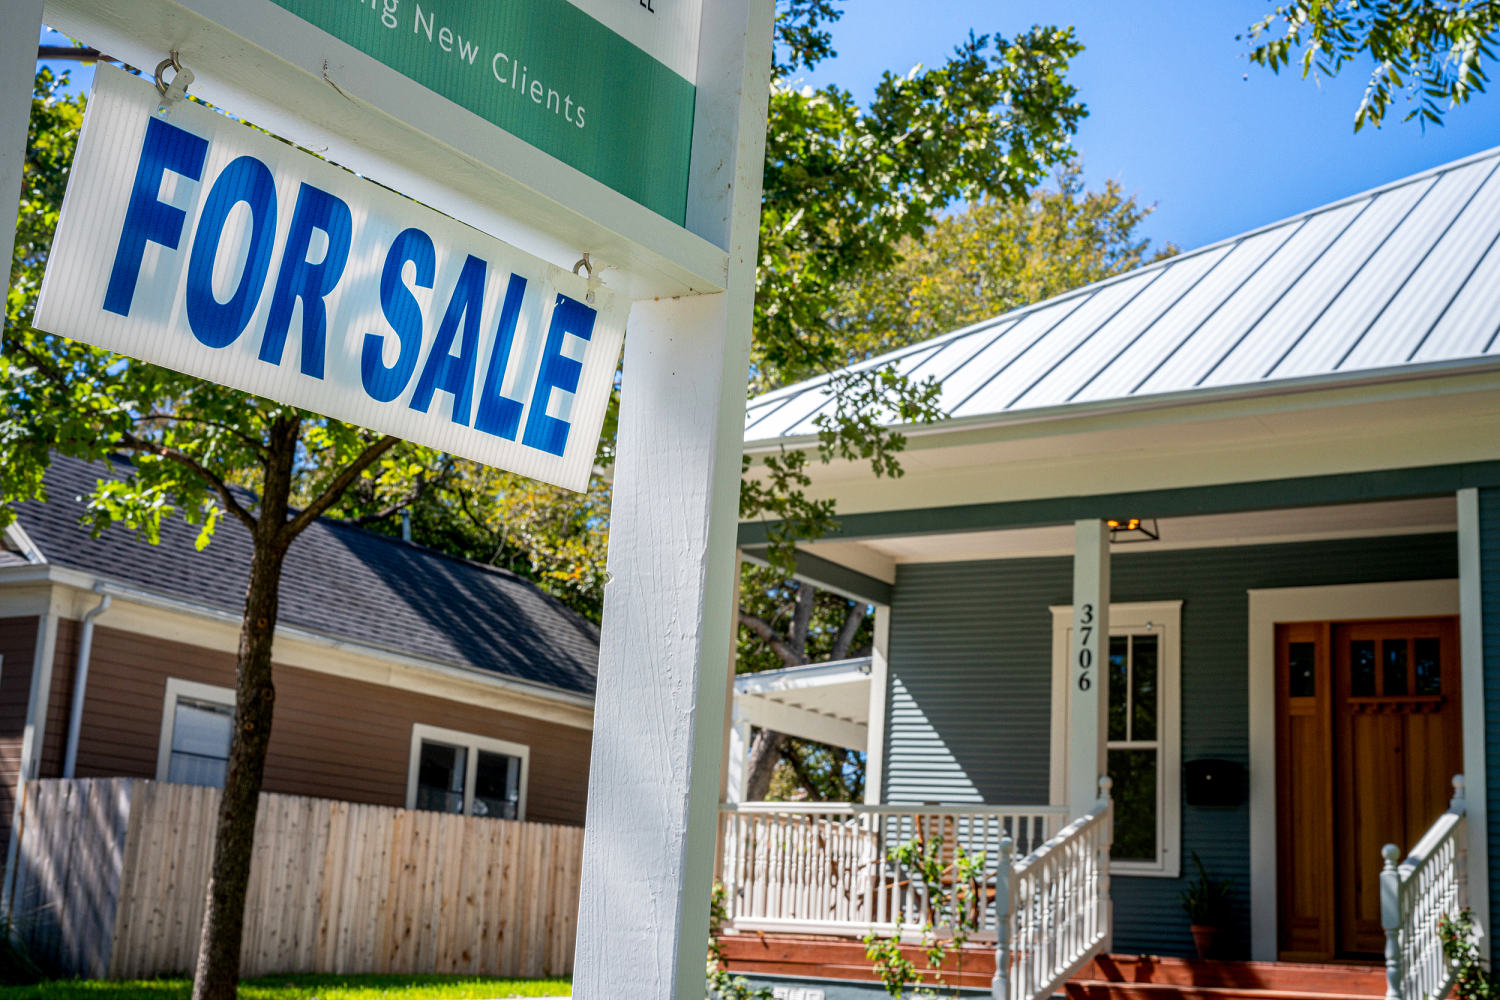 Home sales slipped unexpectedly in April despite big gains in supply